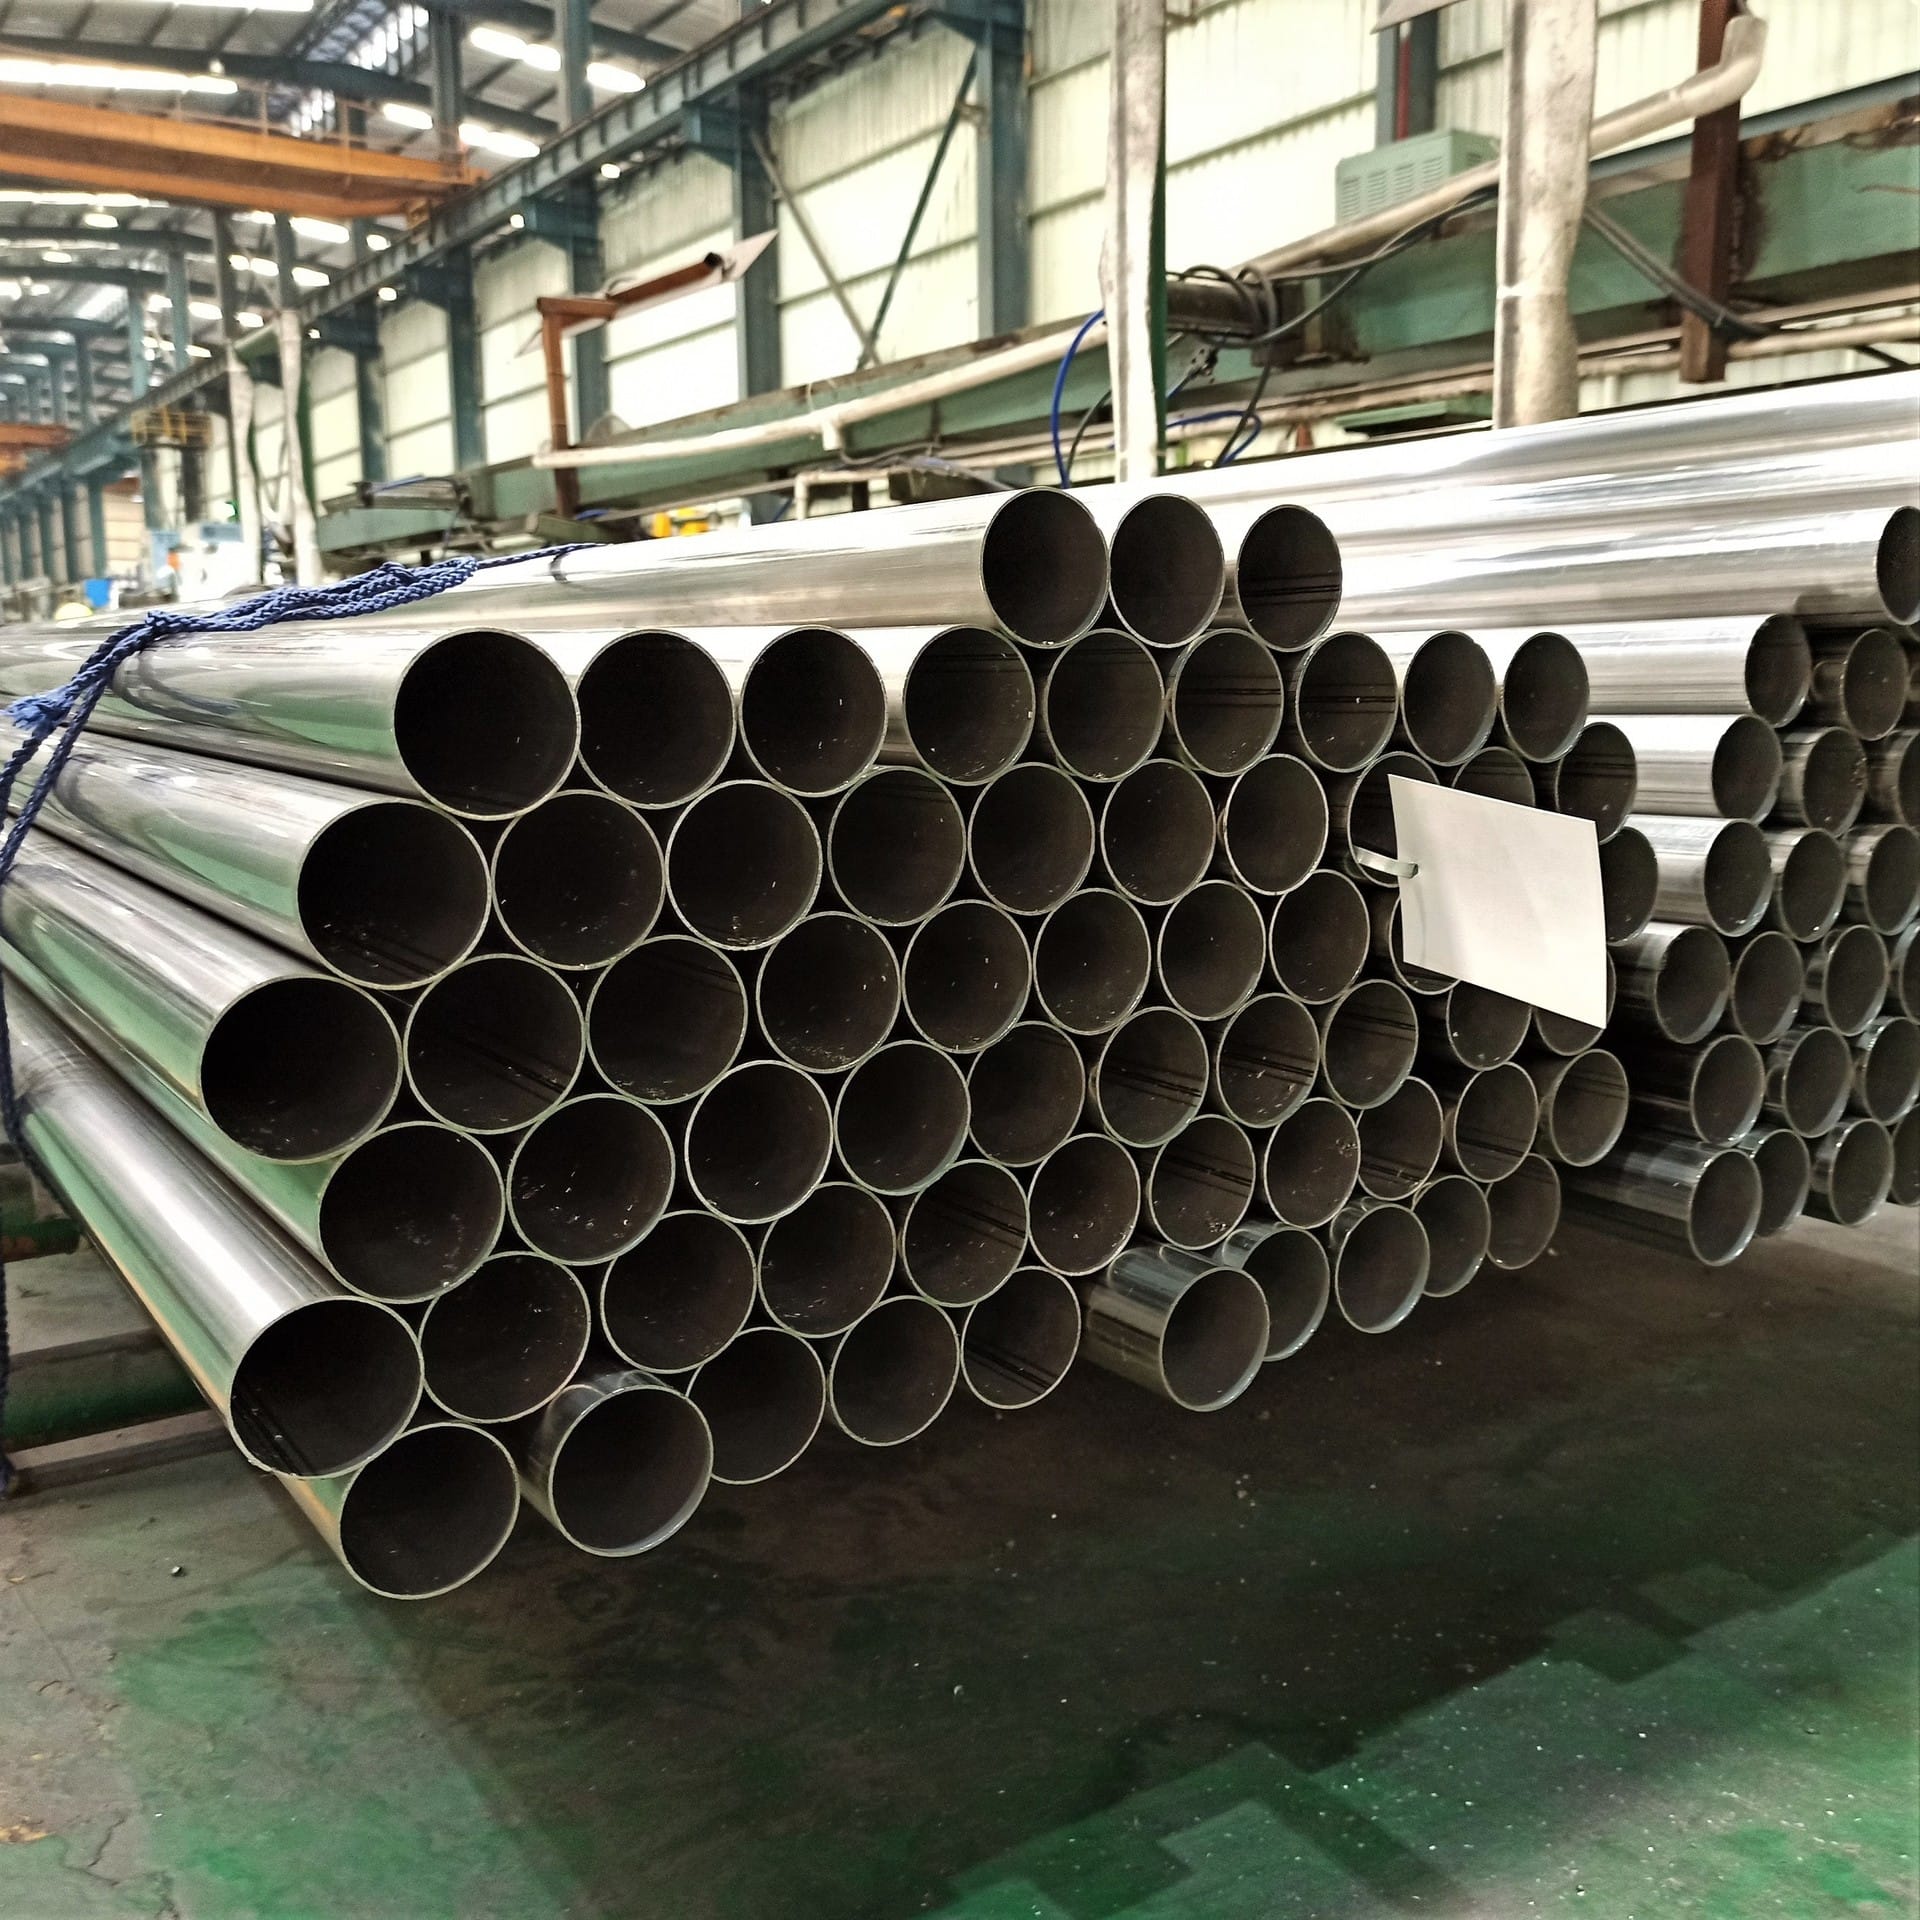 Stainless steel pipes welding fabrication